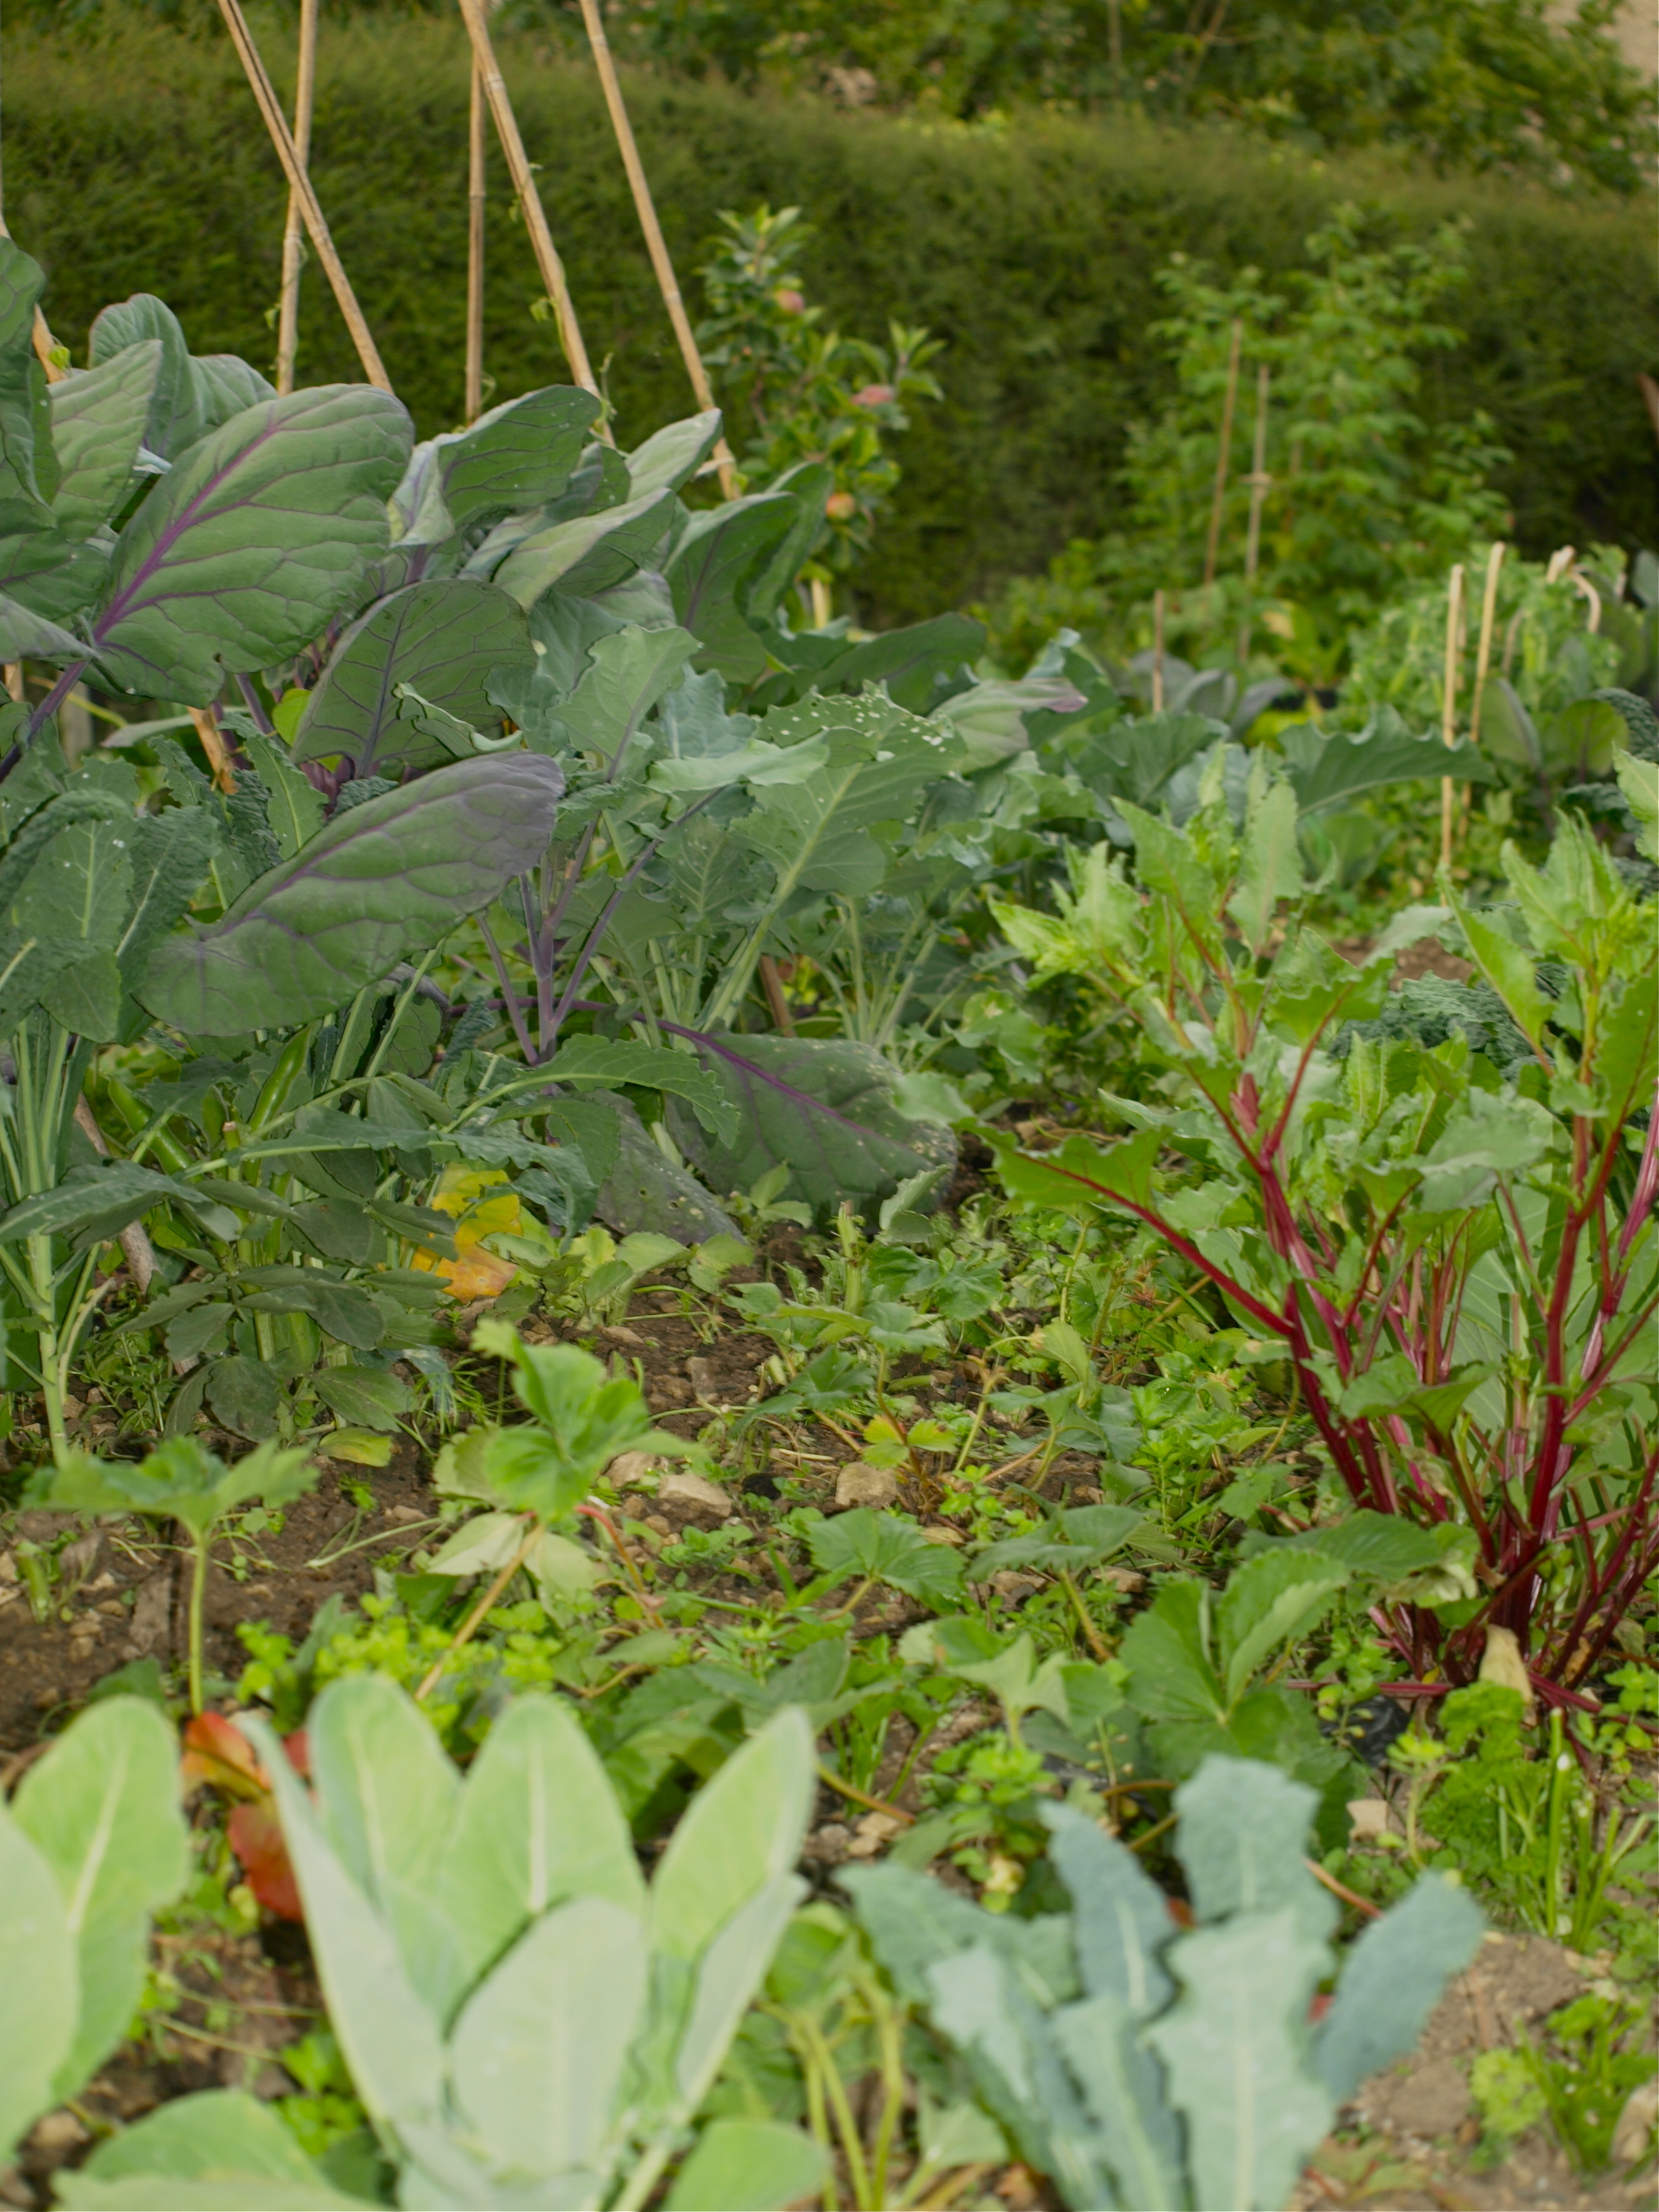 Victoria's Veg Patch with Sprouting Broccoli